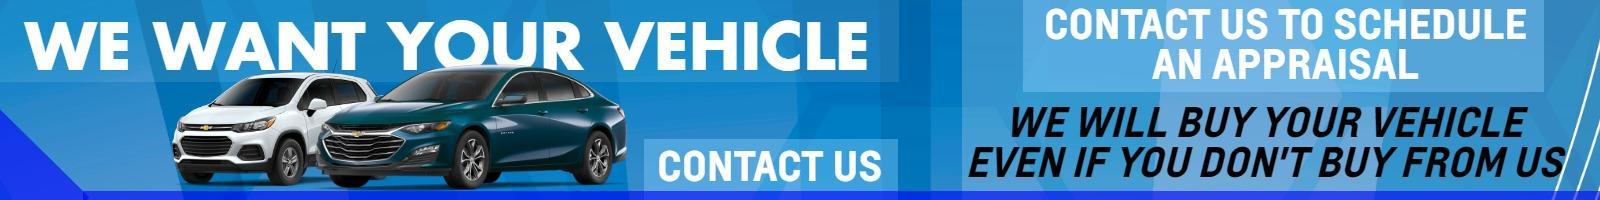 We want your Vehicle